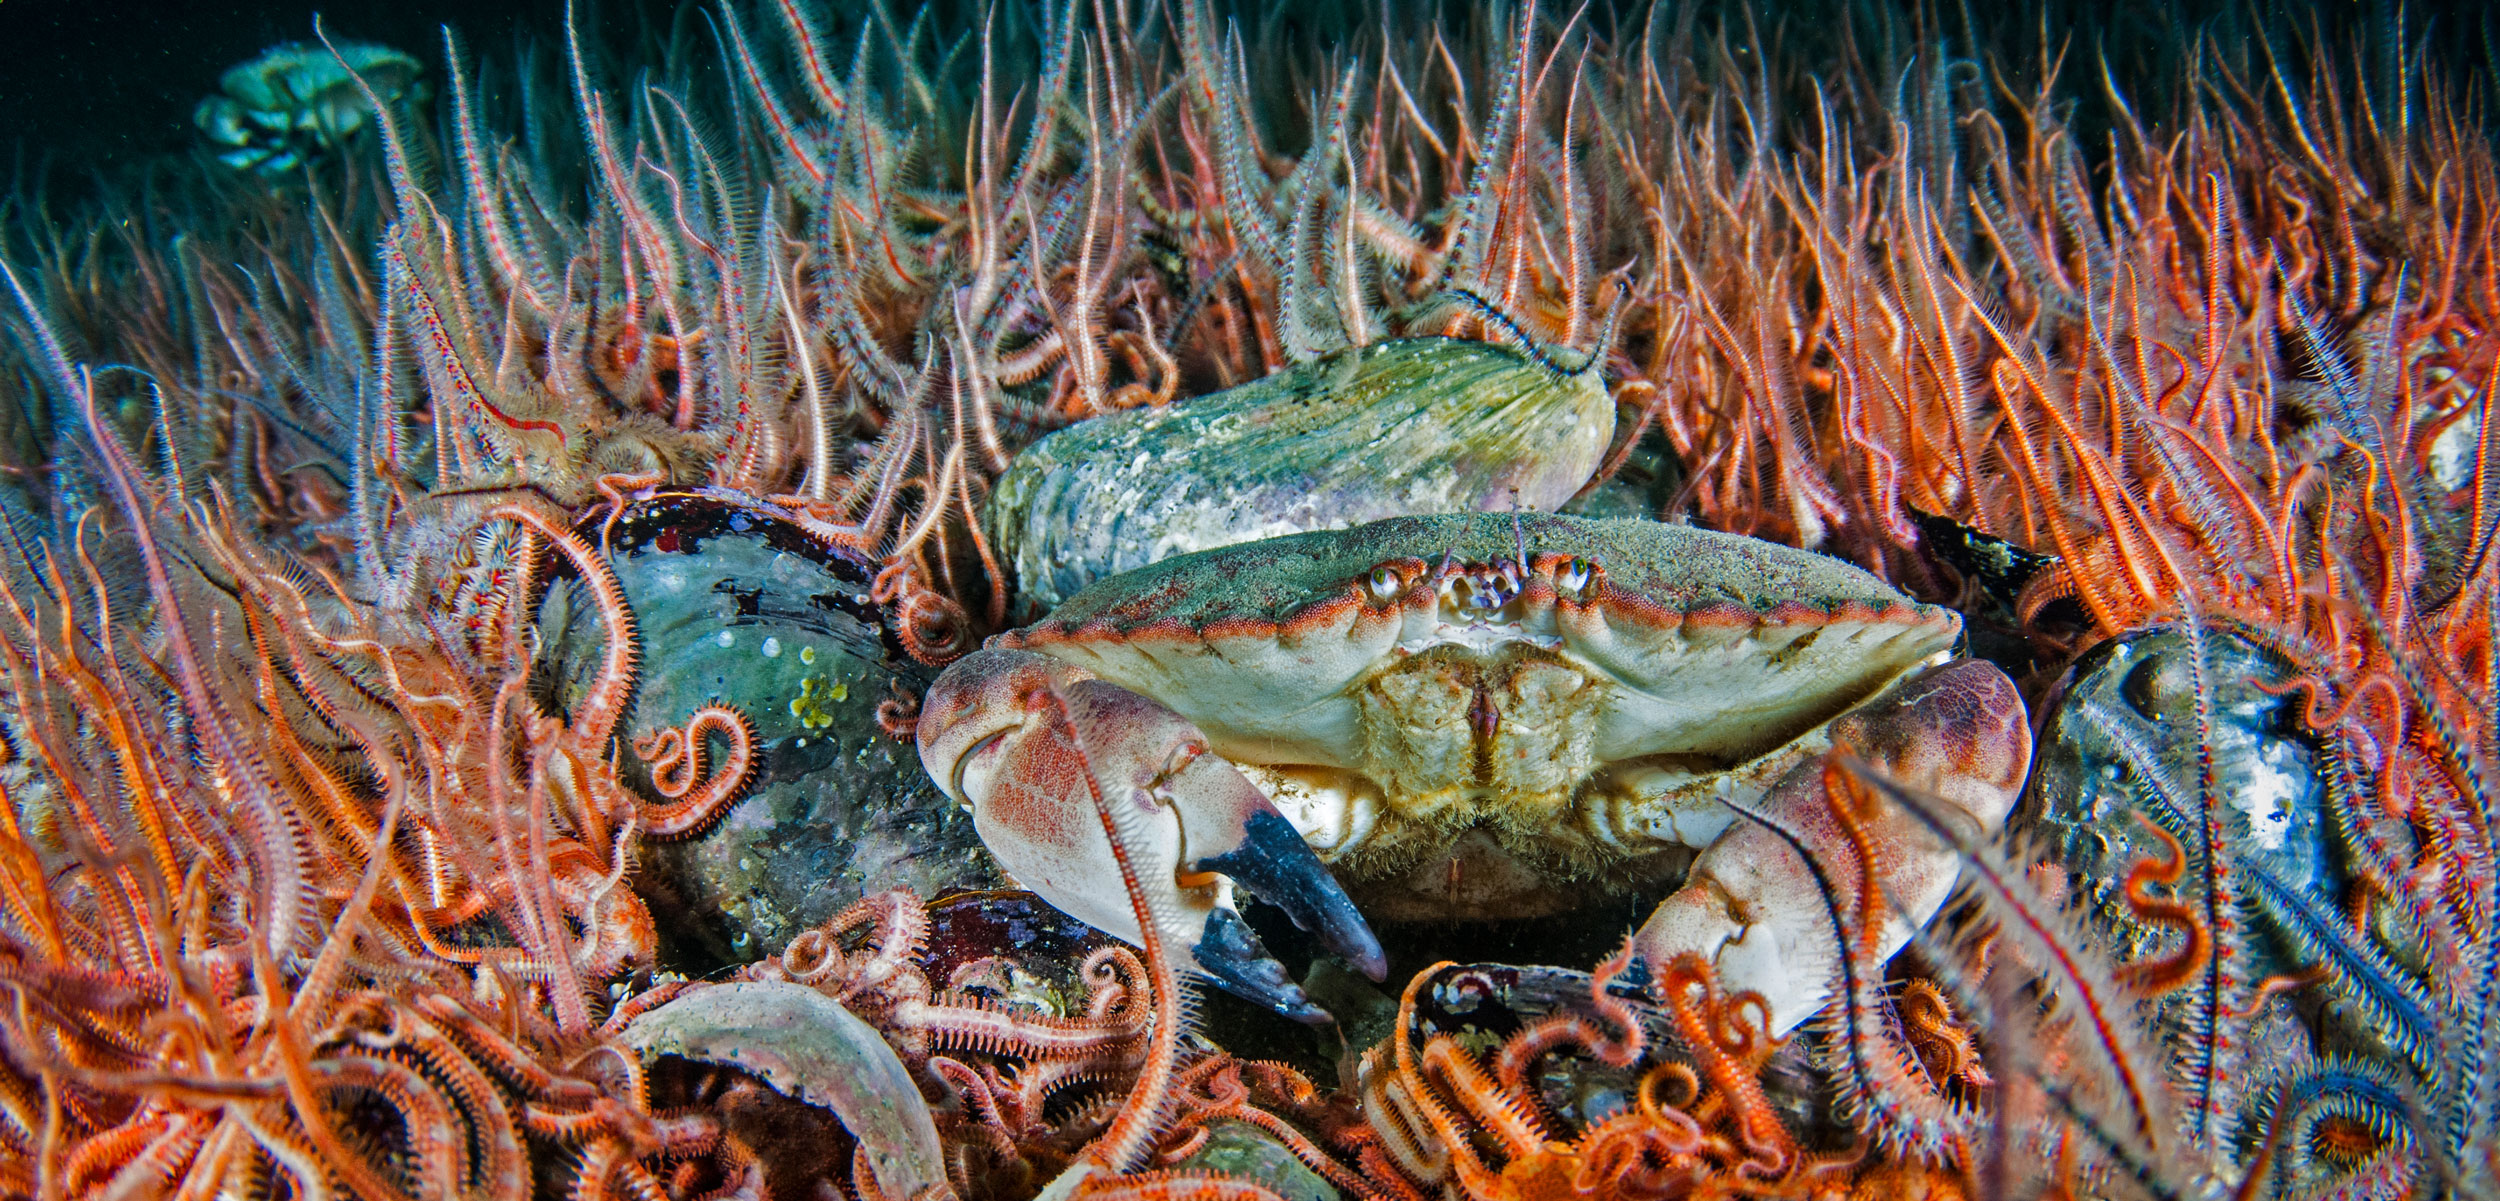 edible crab surrounded by brittle stars